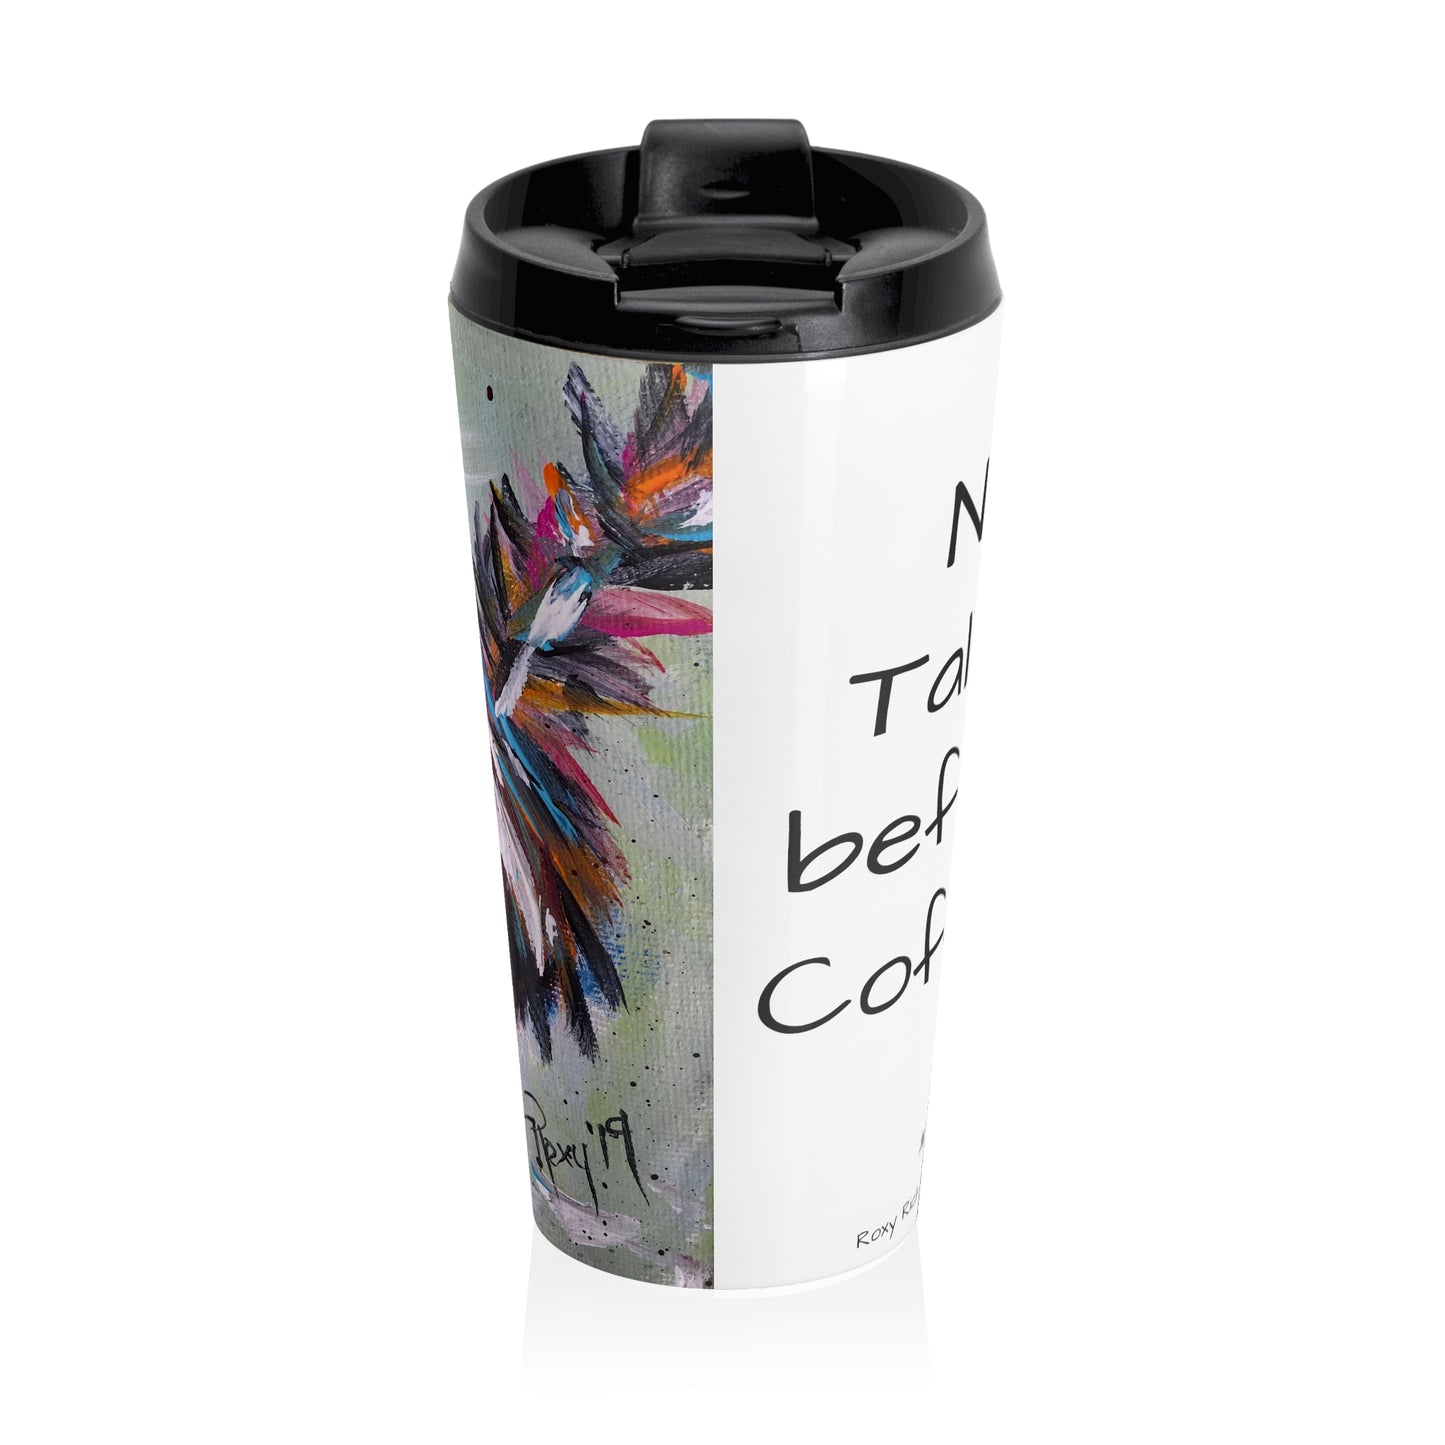 No Talkie before Coffee! Fluffy Rooster Stainless Steel Travel Mug